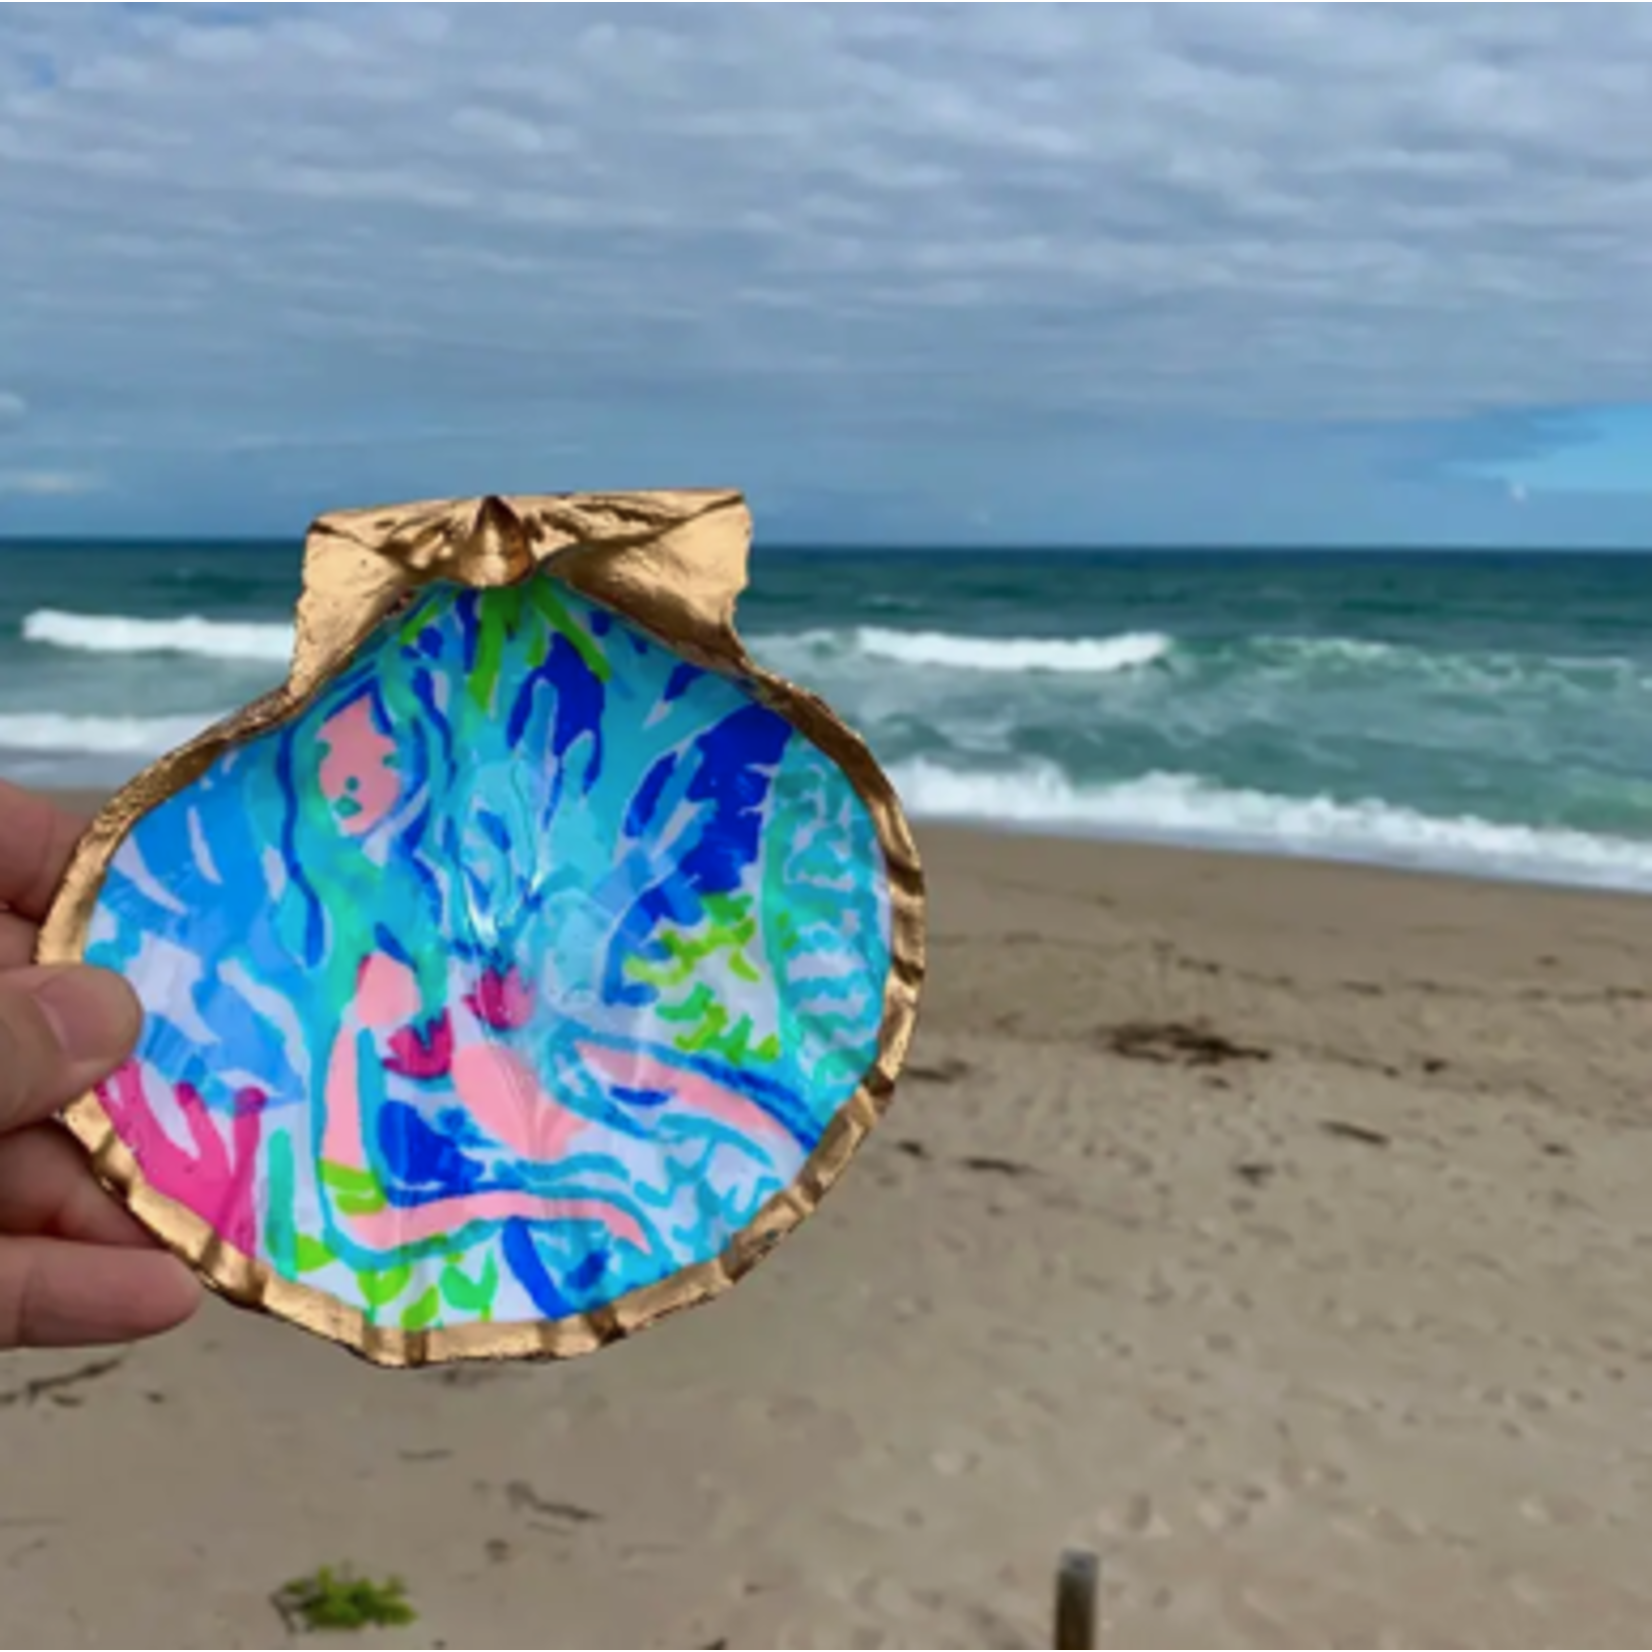 Outside The Box 6" Palm Beach Trinket Hand Painted Shell Decor - EACH SOLD SEPARATELY